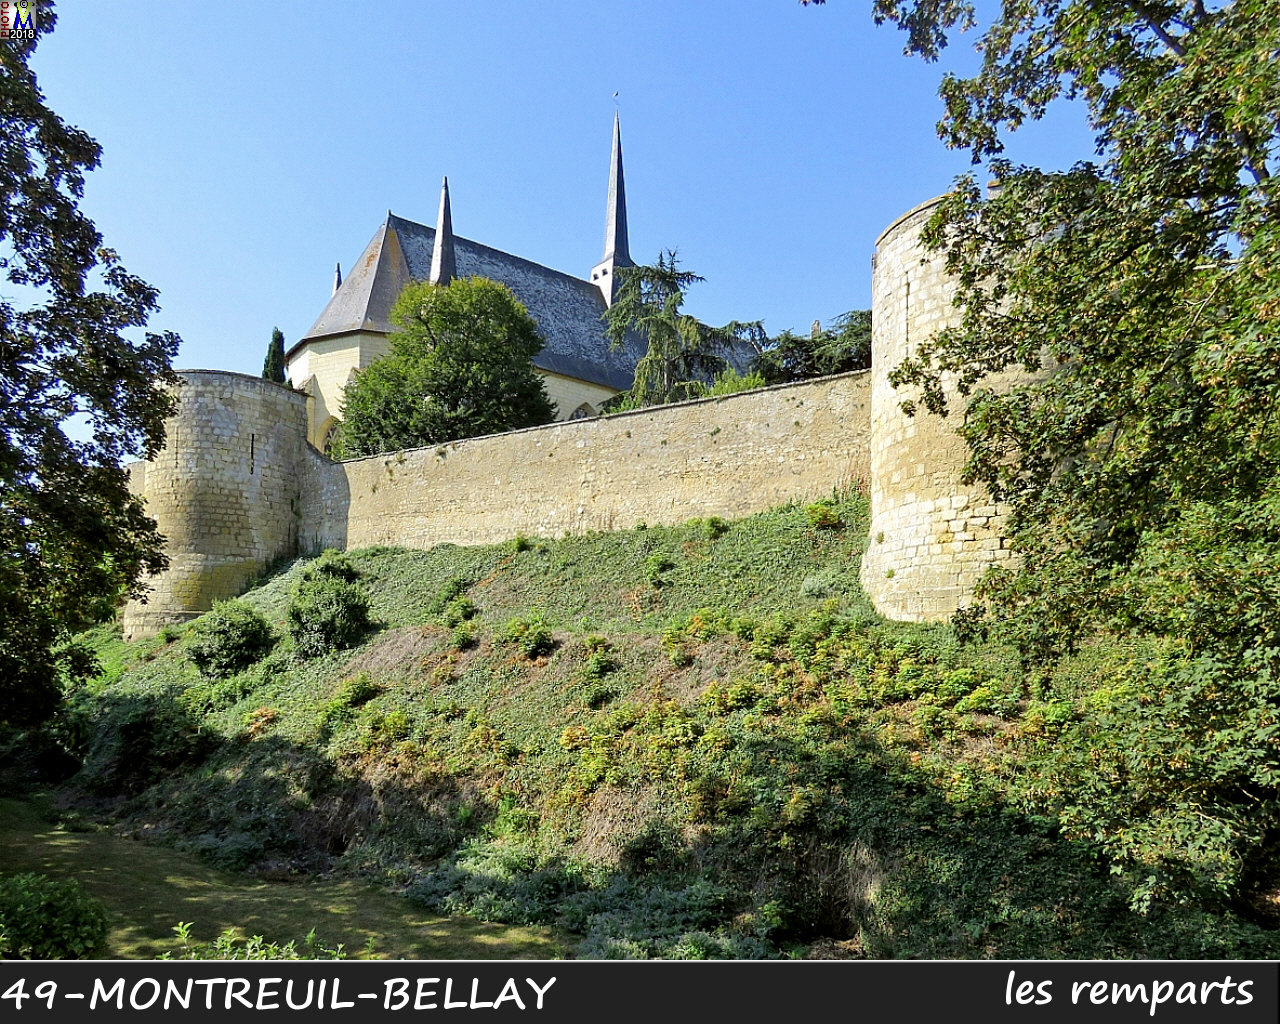 49MONTREUIL-BELLAY_remparts_1032.jpg